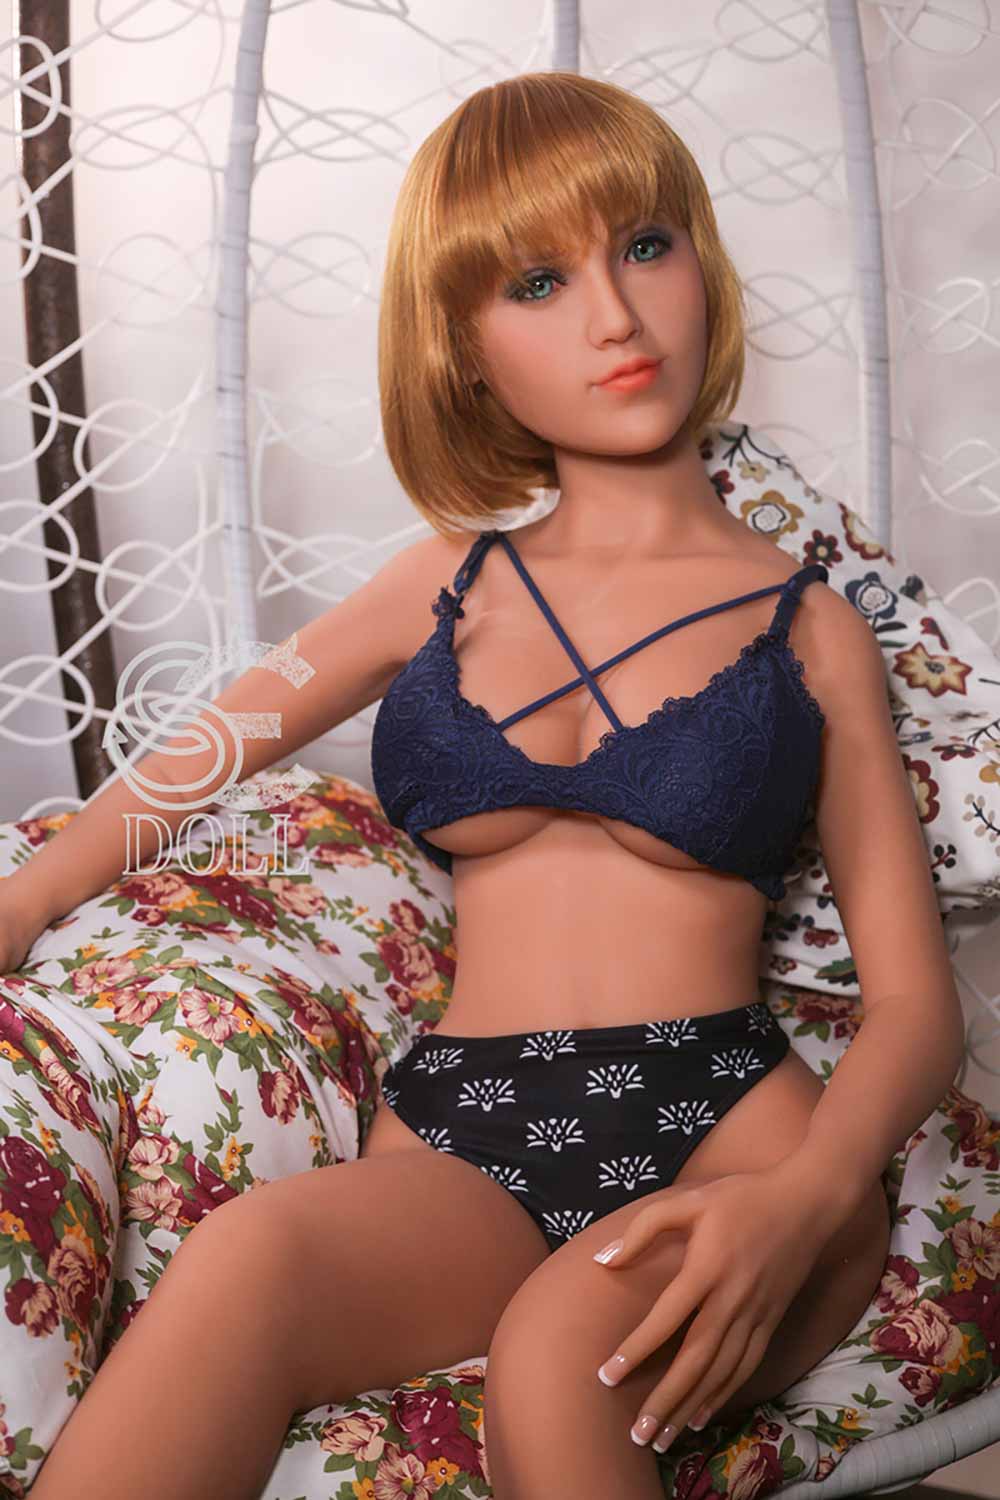 SEDOLL Josie, bambola sessuale in TPE, coppa D, 148 cm